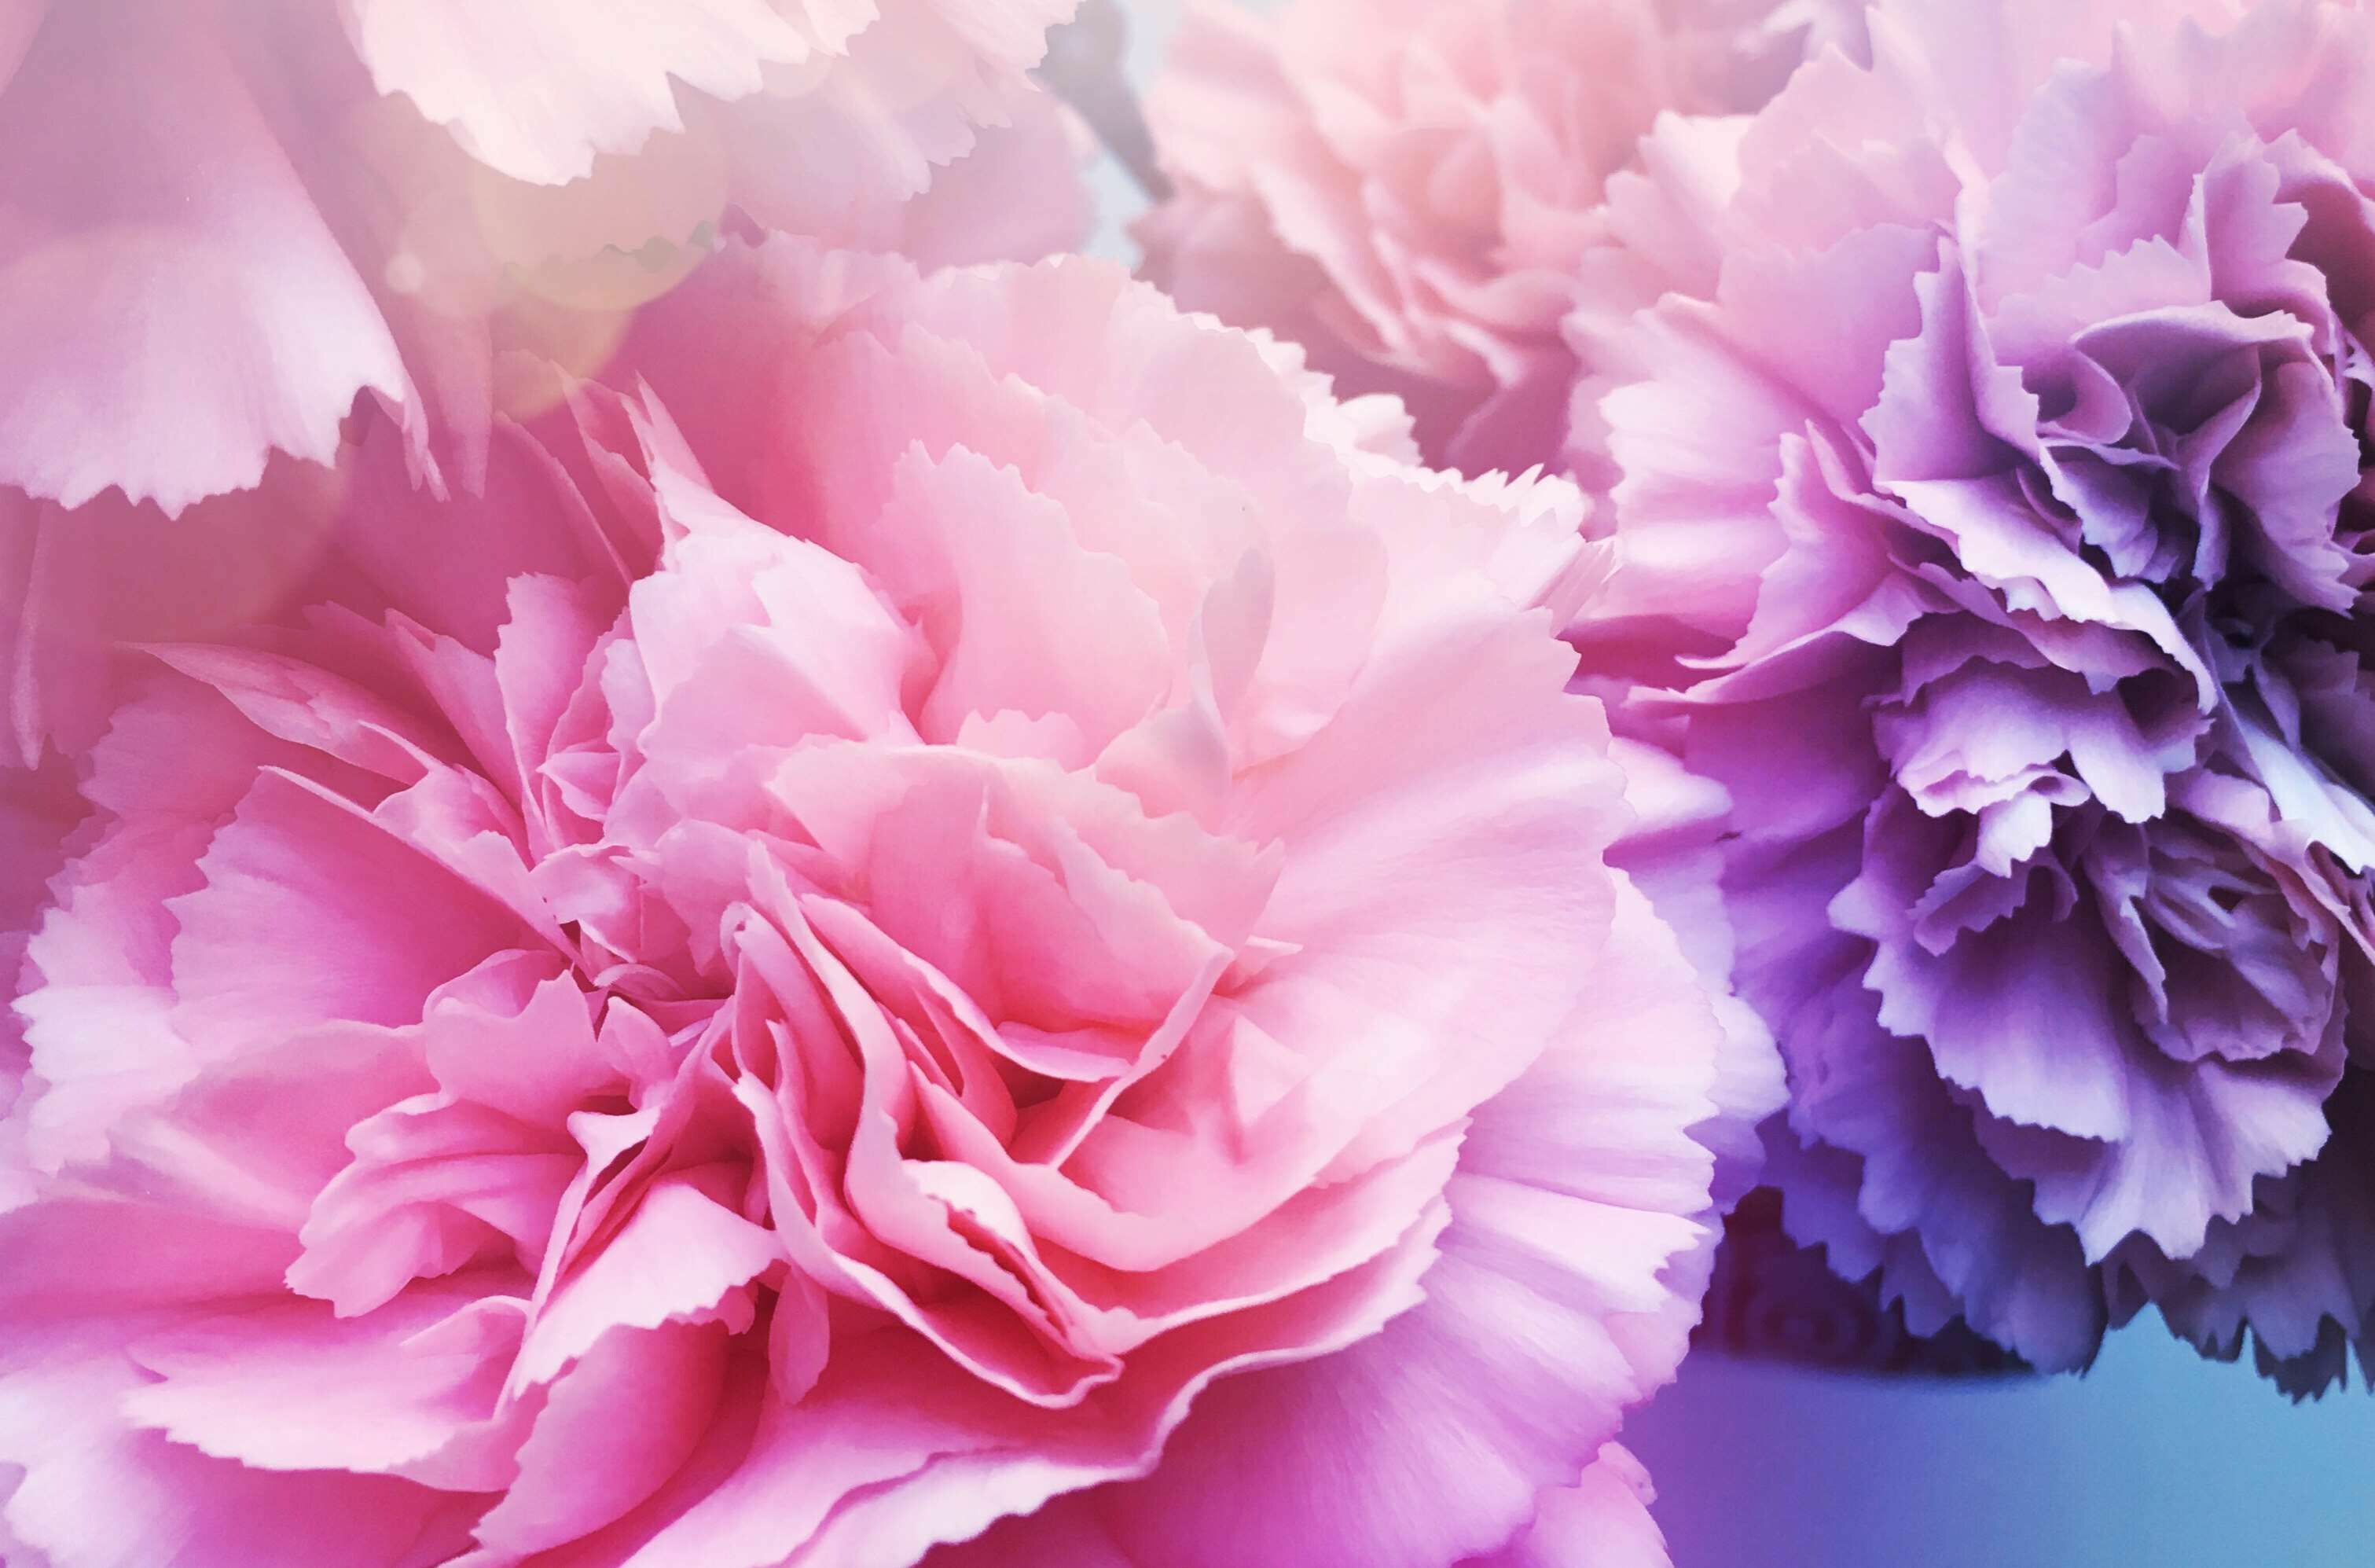 Carnation: The original natural flower color is bright pinkish-purple, but cultivars of other colors, including red, white, yellow, blue, and green, along with some white with colored striped variations have been developed, Flowering plant. 3030x2000 HD Wallpaper.